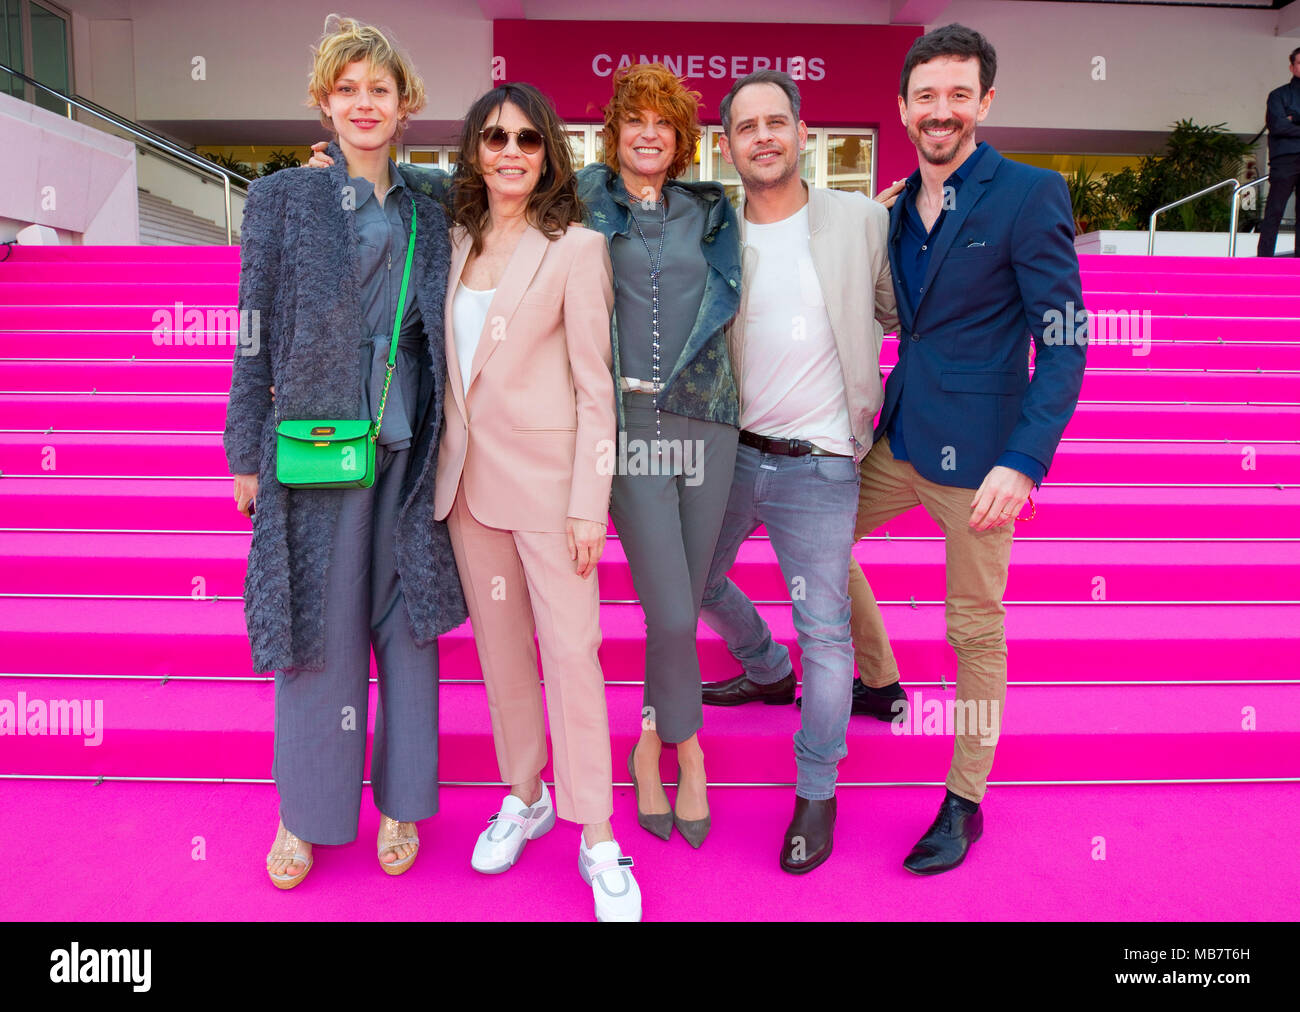 Cannes, France. 08th Apr, 2018. Cannes, France - April 08, 2018: MIPTV Canneseries with Actors Iris Berben and Moritz Bleibtreu and Producer Oliver Berben with Writer Nina Grosse.The Typist, Die Protokollantin, MIPCOM, a Reed MIDEM Event, ZDF, Beta Film, Moovie | usage worldwide Credit: dpa/Alamy Live News Stock Photo